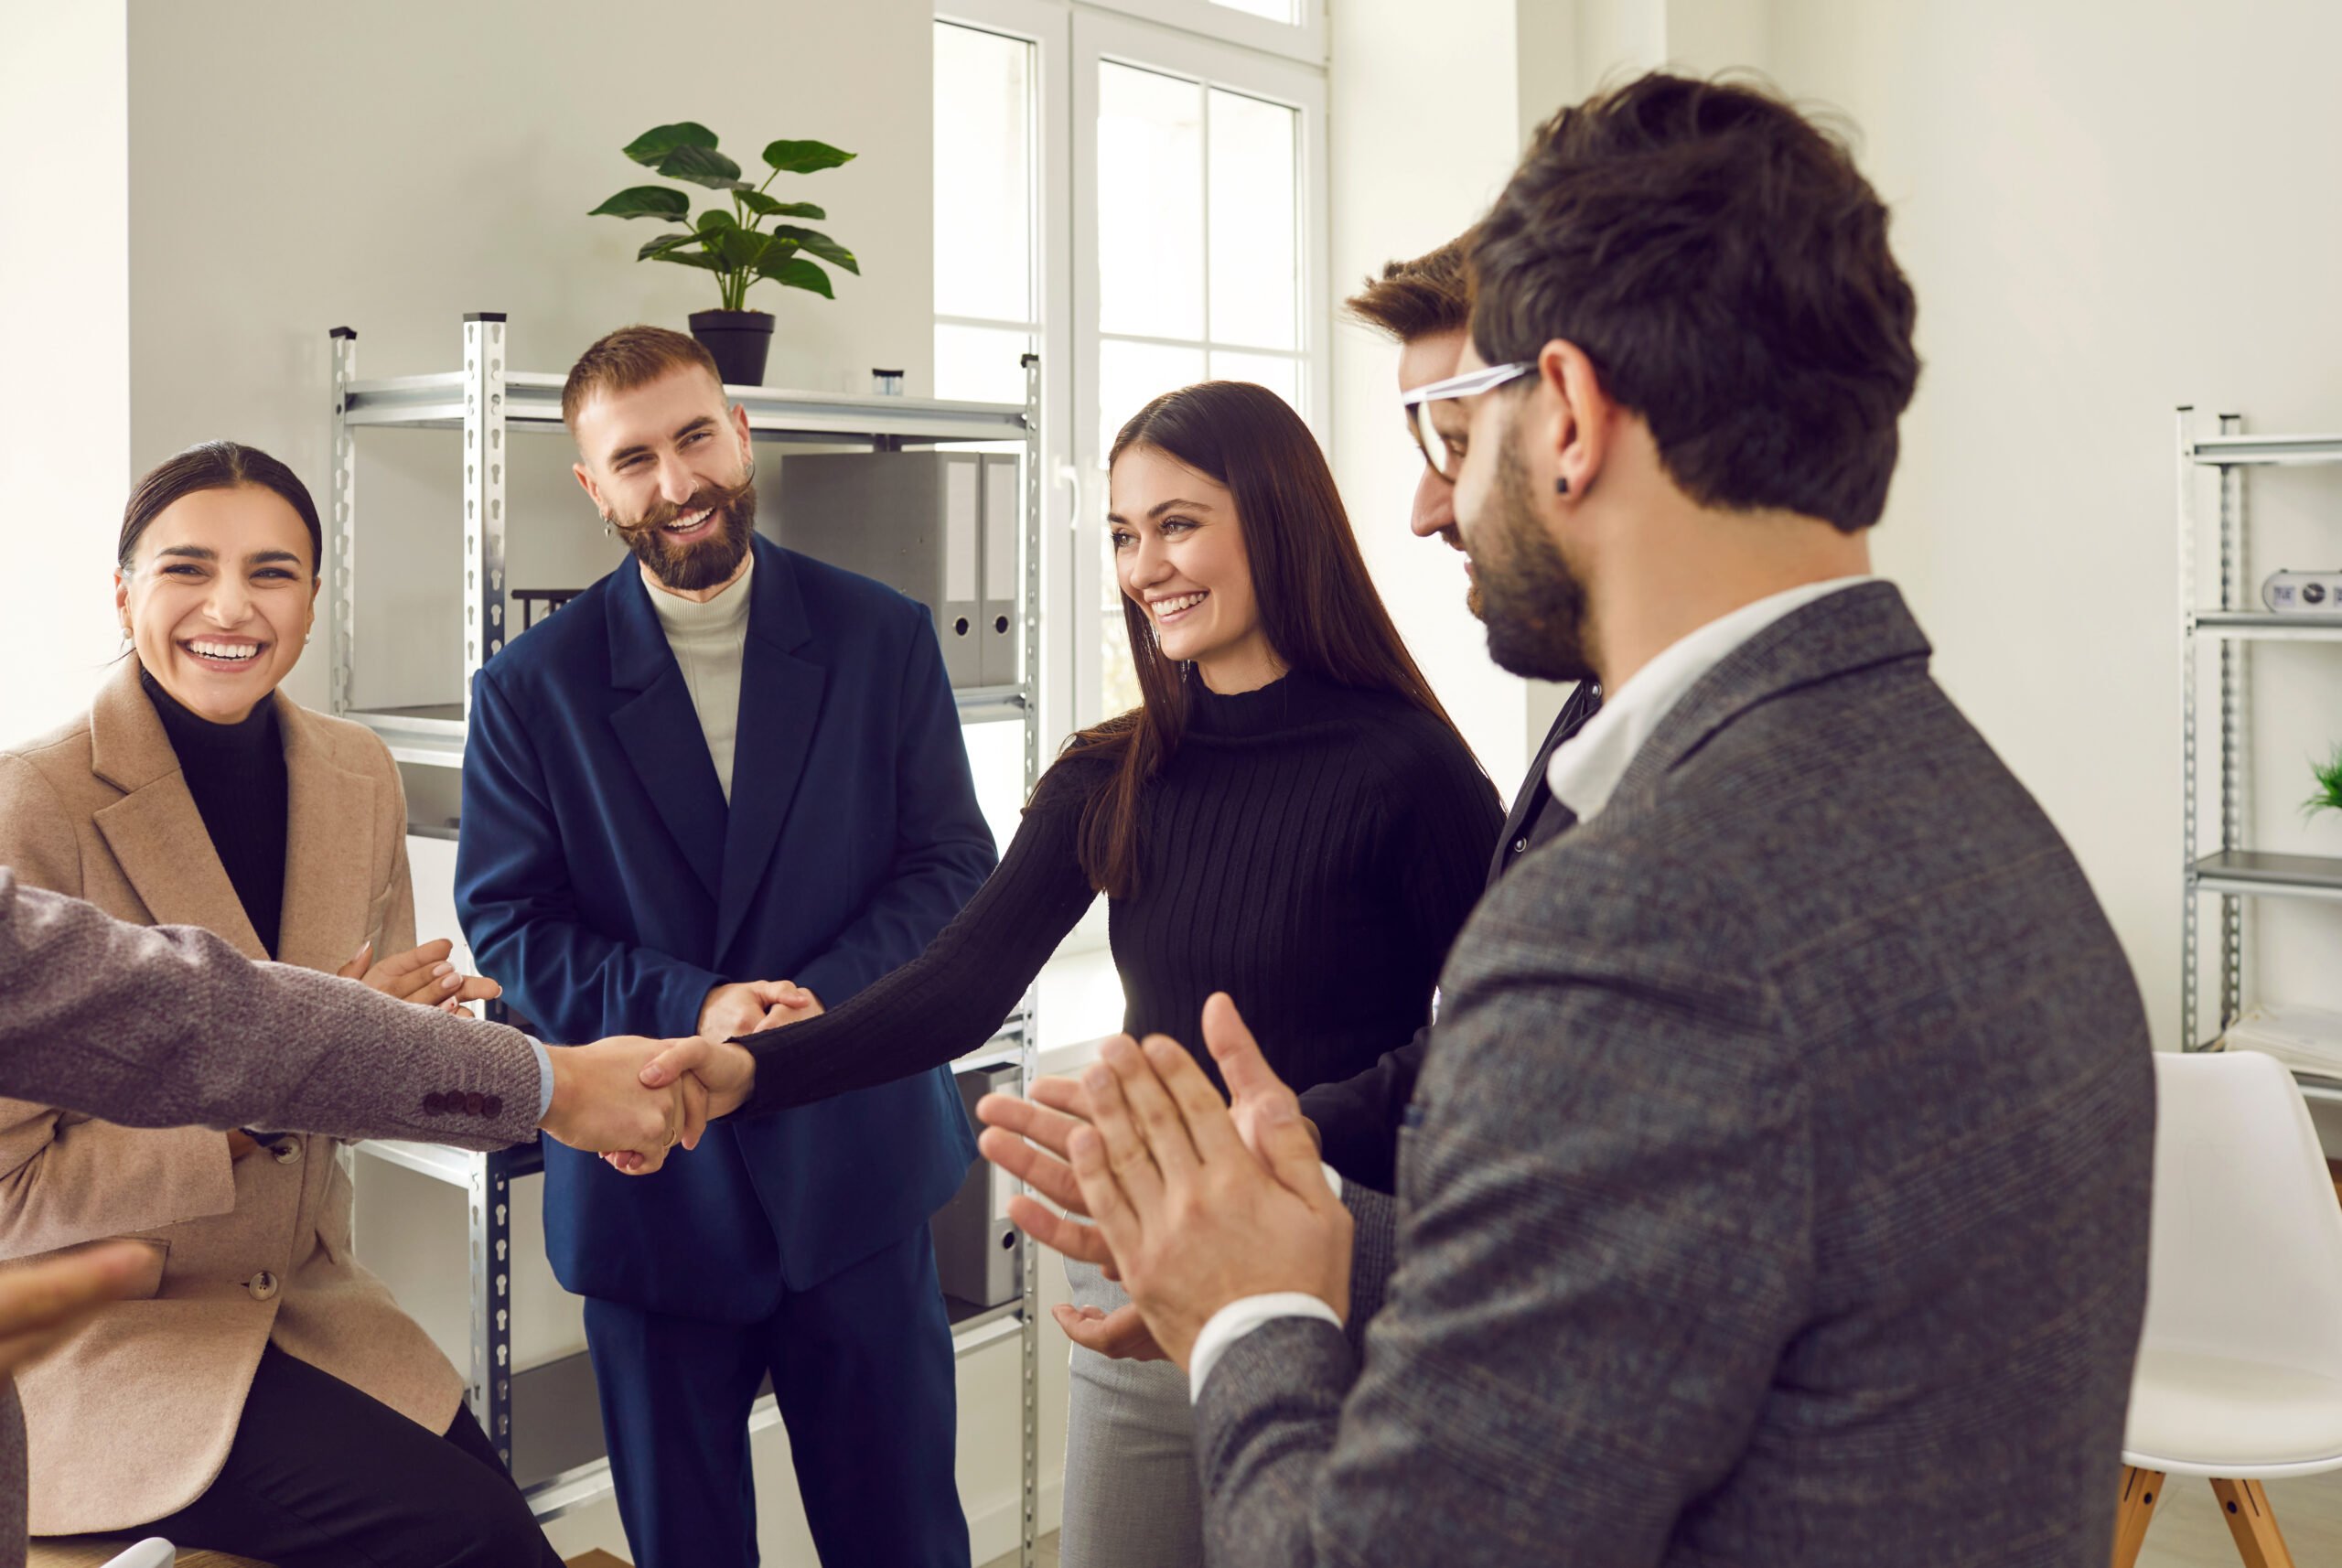 Employee shaking hand with new coworkers during welcome to the team event